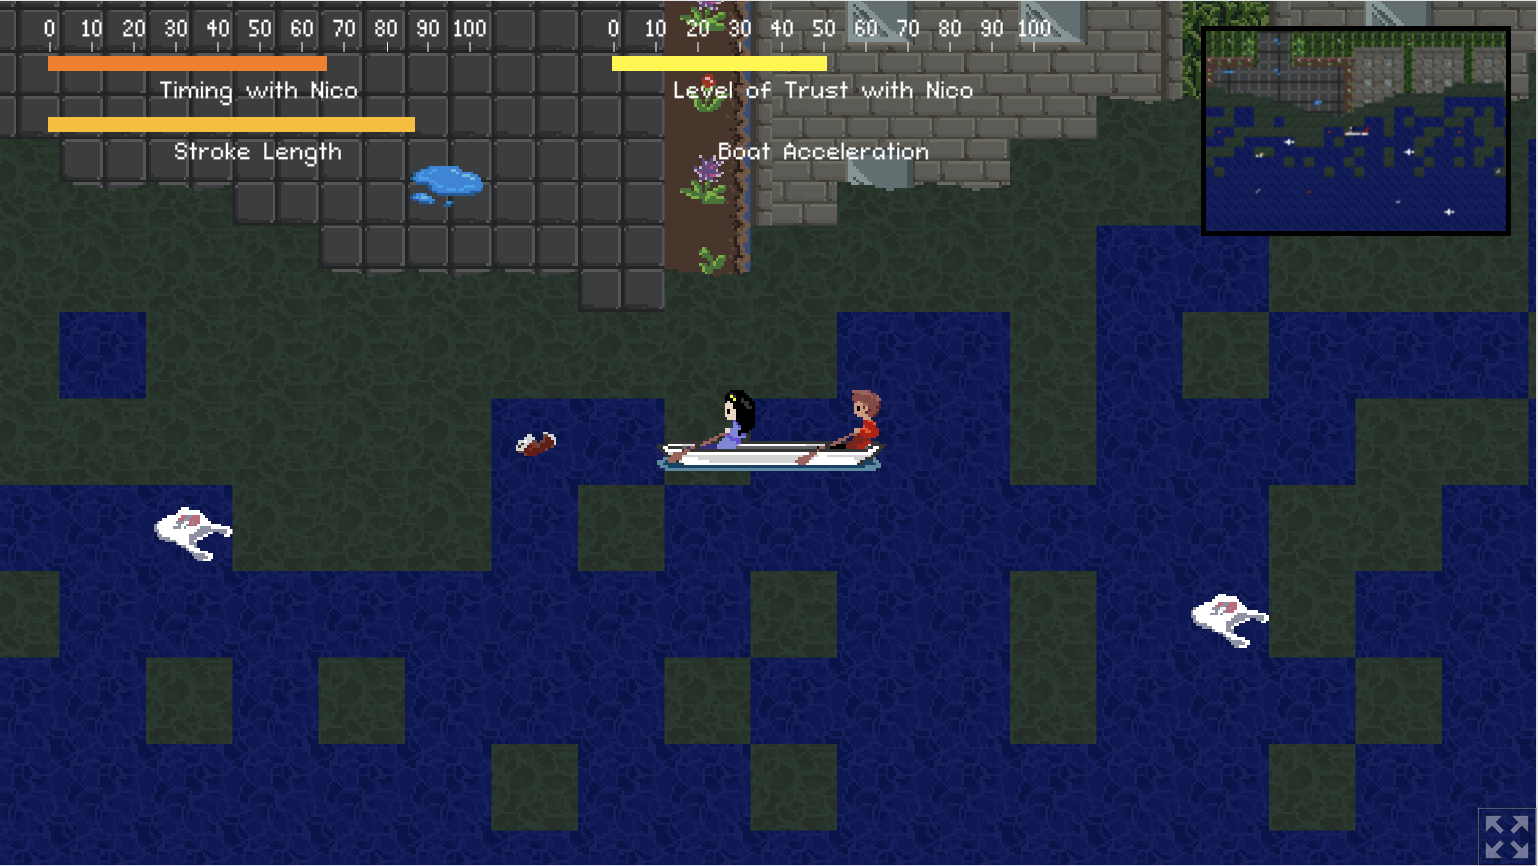 pixel art depicting a rowboat with two characters on it, navigating a river with landblocks and plastic bags inside.